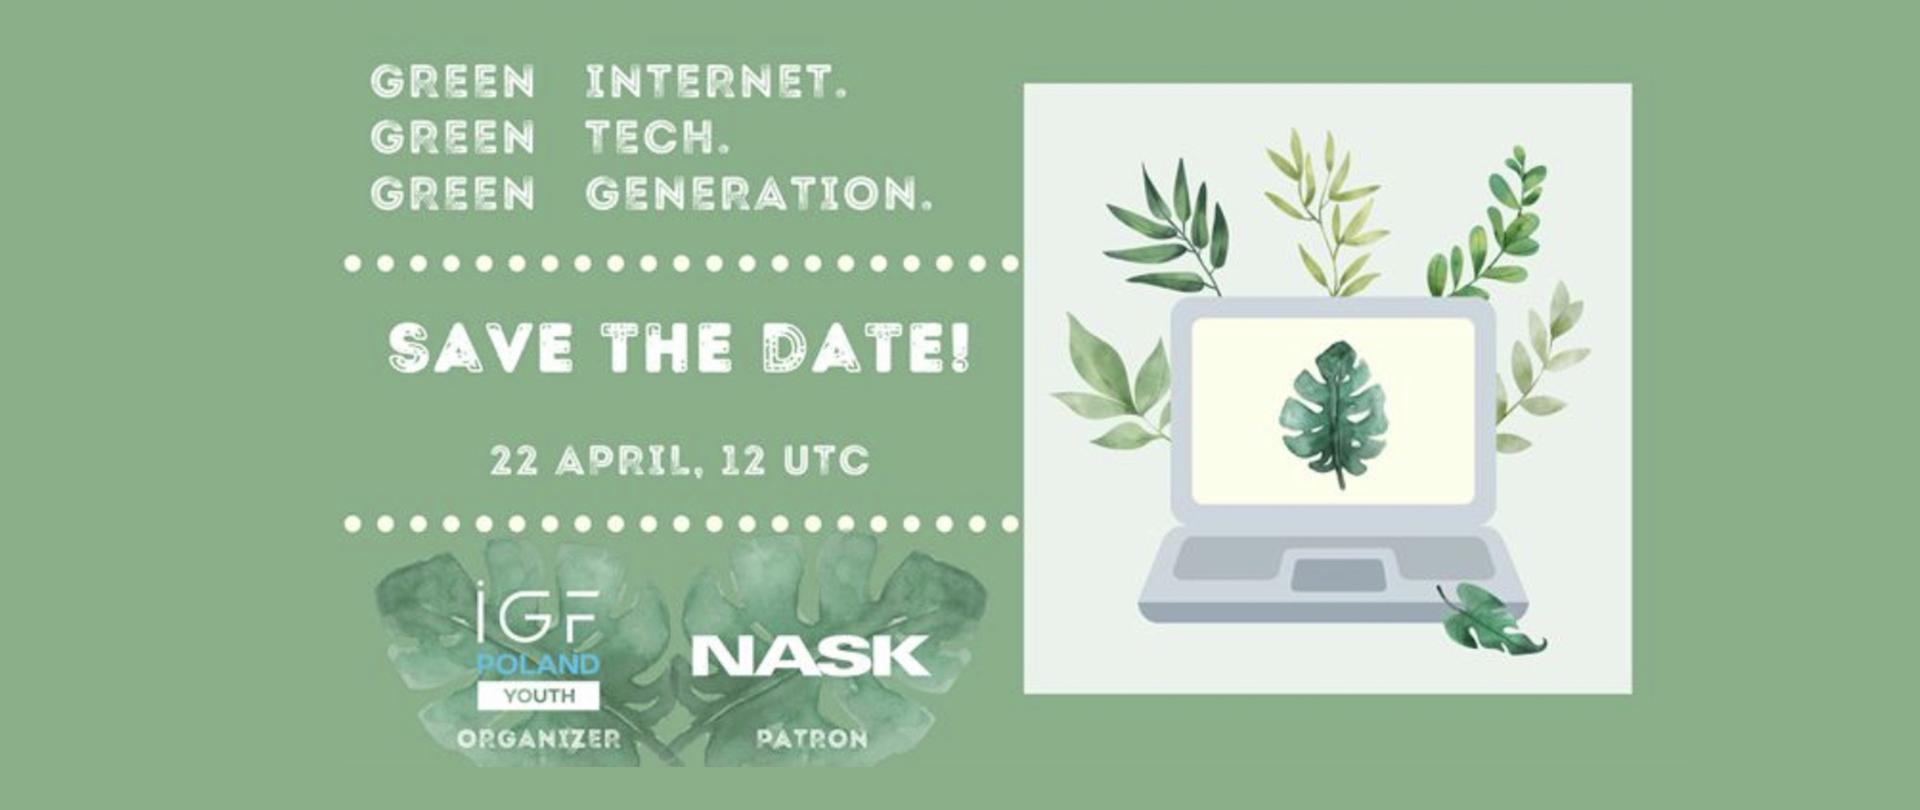 Vector graphic on a green background. On the left is the caption Green Internet, Green Tech, Green Generation. In the middle it says save the date - 22 aprlil, 12 UTC. On the right side of the graphic is a laptop and behind it a background composed of leaves. In the bottom left part - the logotypes of IGF Poland (organizer) and NASK (patron)